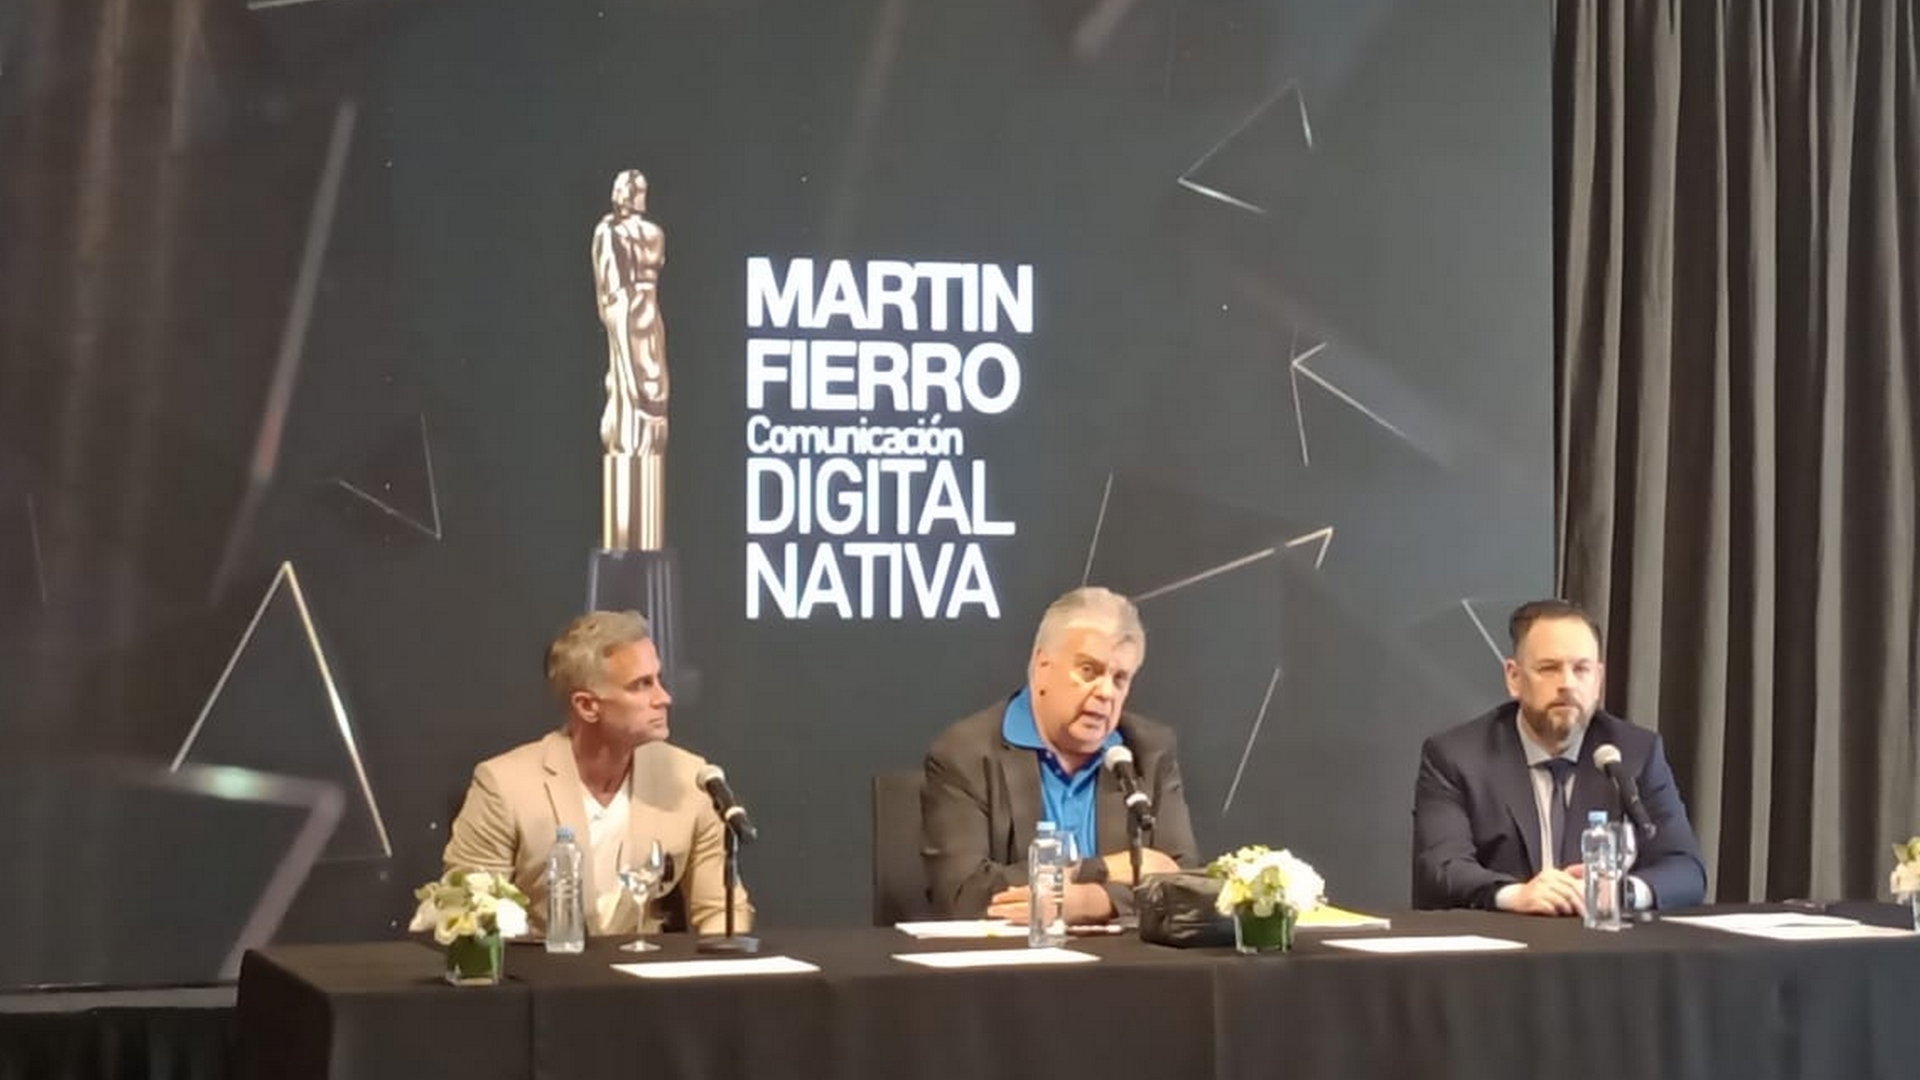 Martín Fierro Digital Nativo Awards who are the nominees and when will